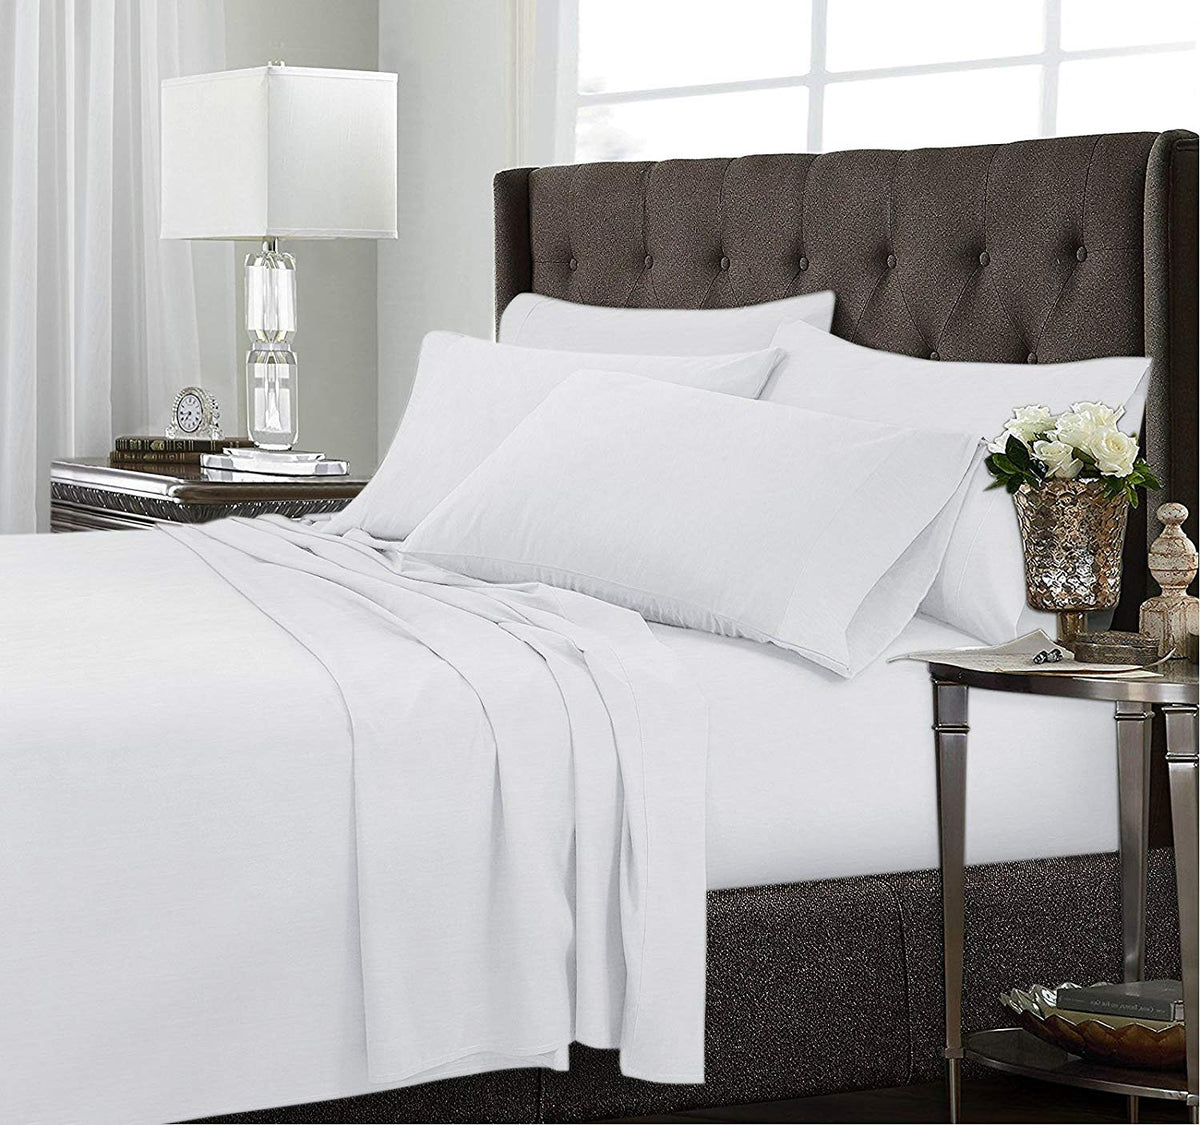 Marquess Microfiber Polyester Bed Sheet 4-Pc King Size Bedding Set (White/Gray)